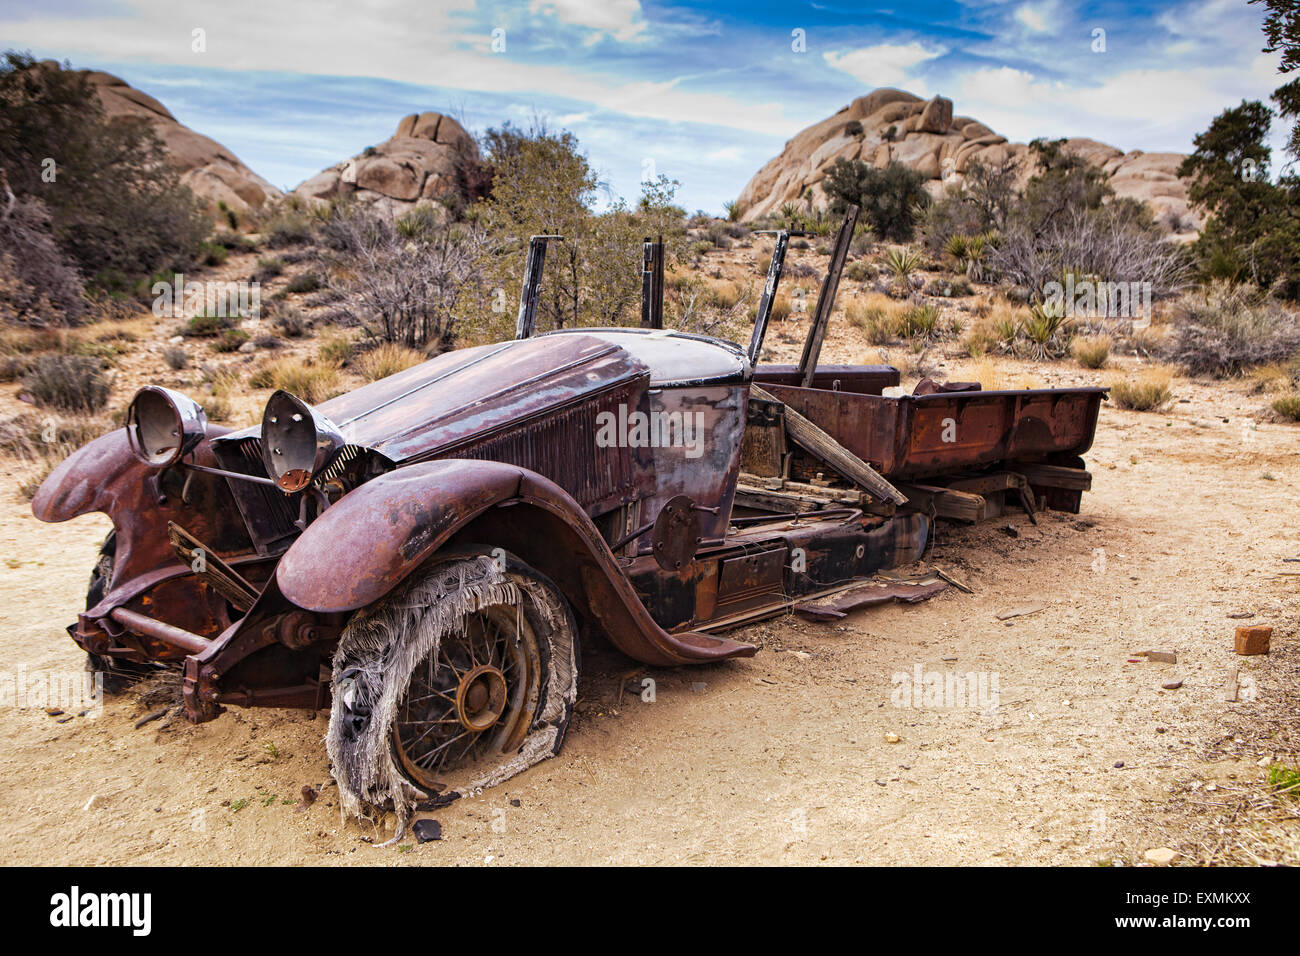 An abandoned car left over from the Wall Street Mill and Mine in Joshua Tree National Park, California, USA. Stock Photo